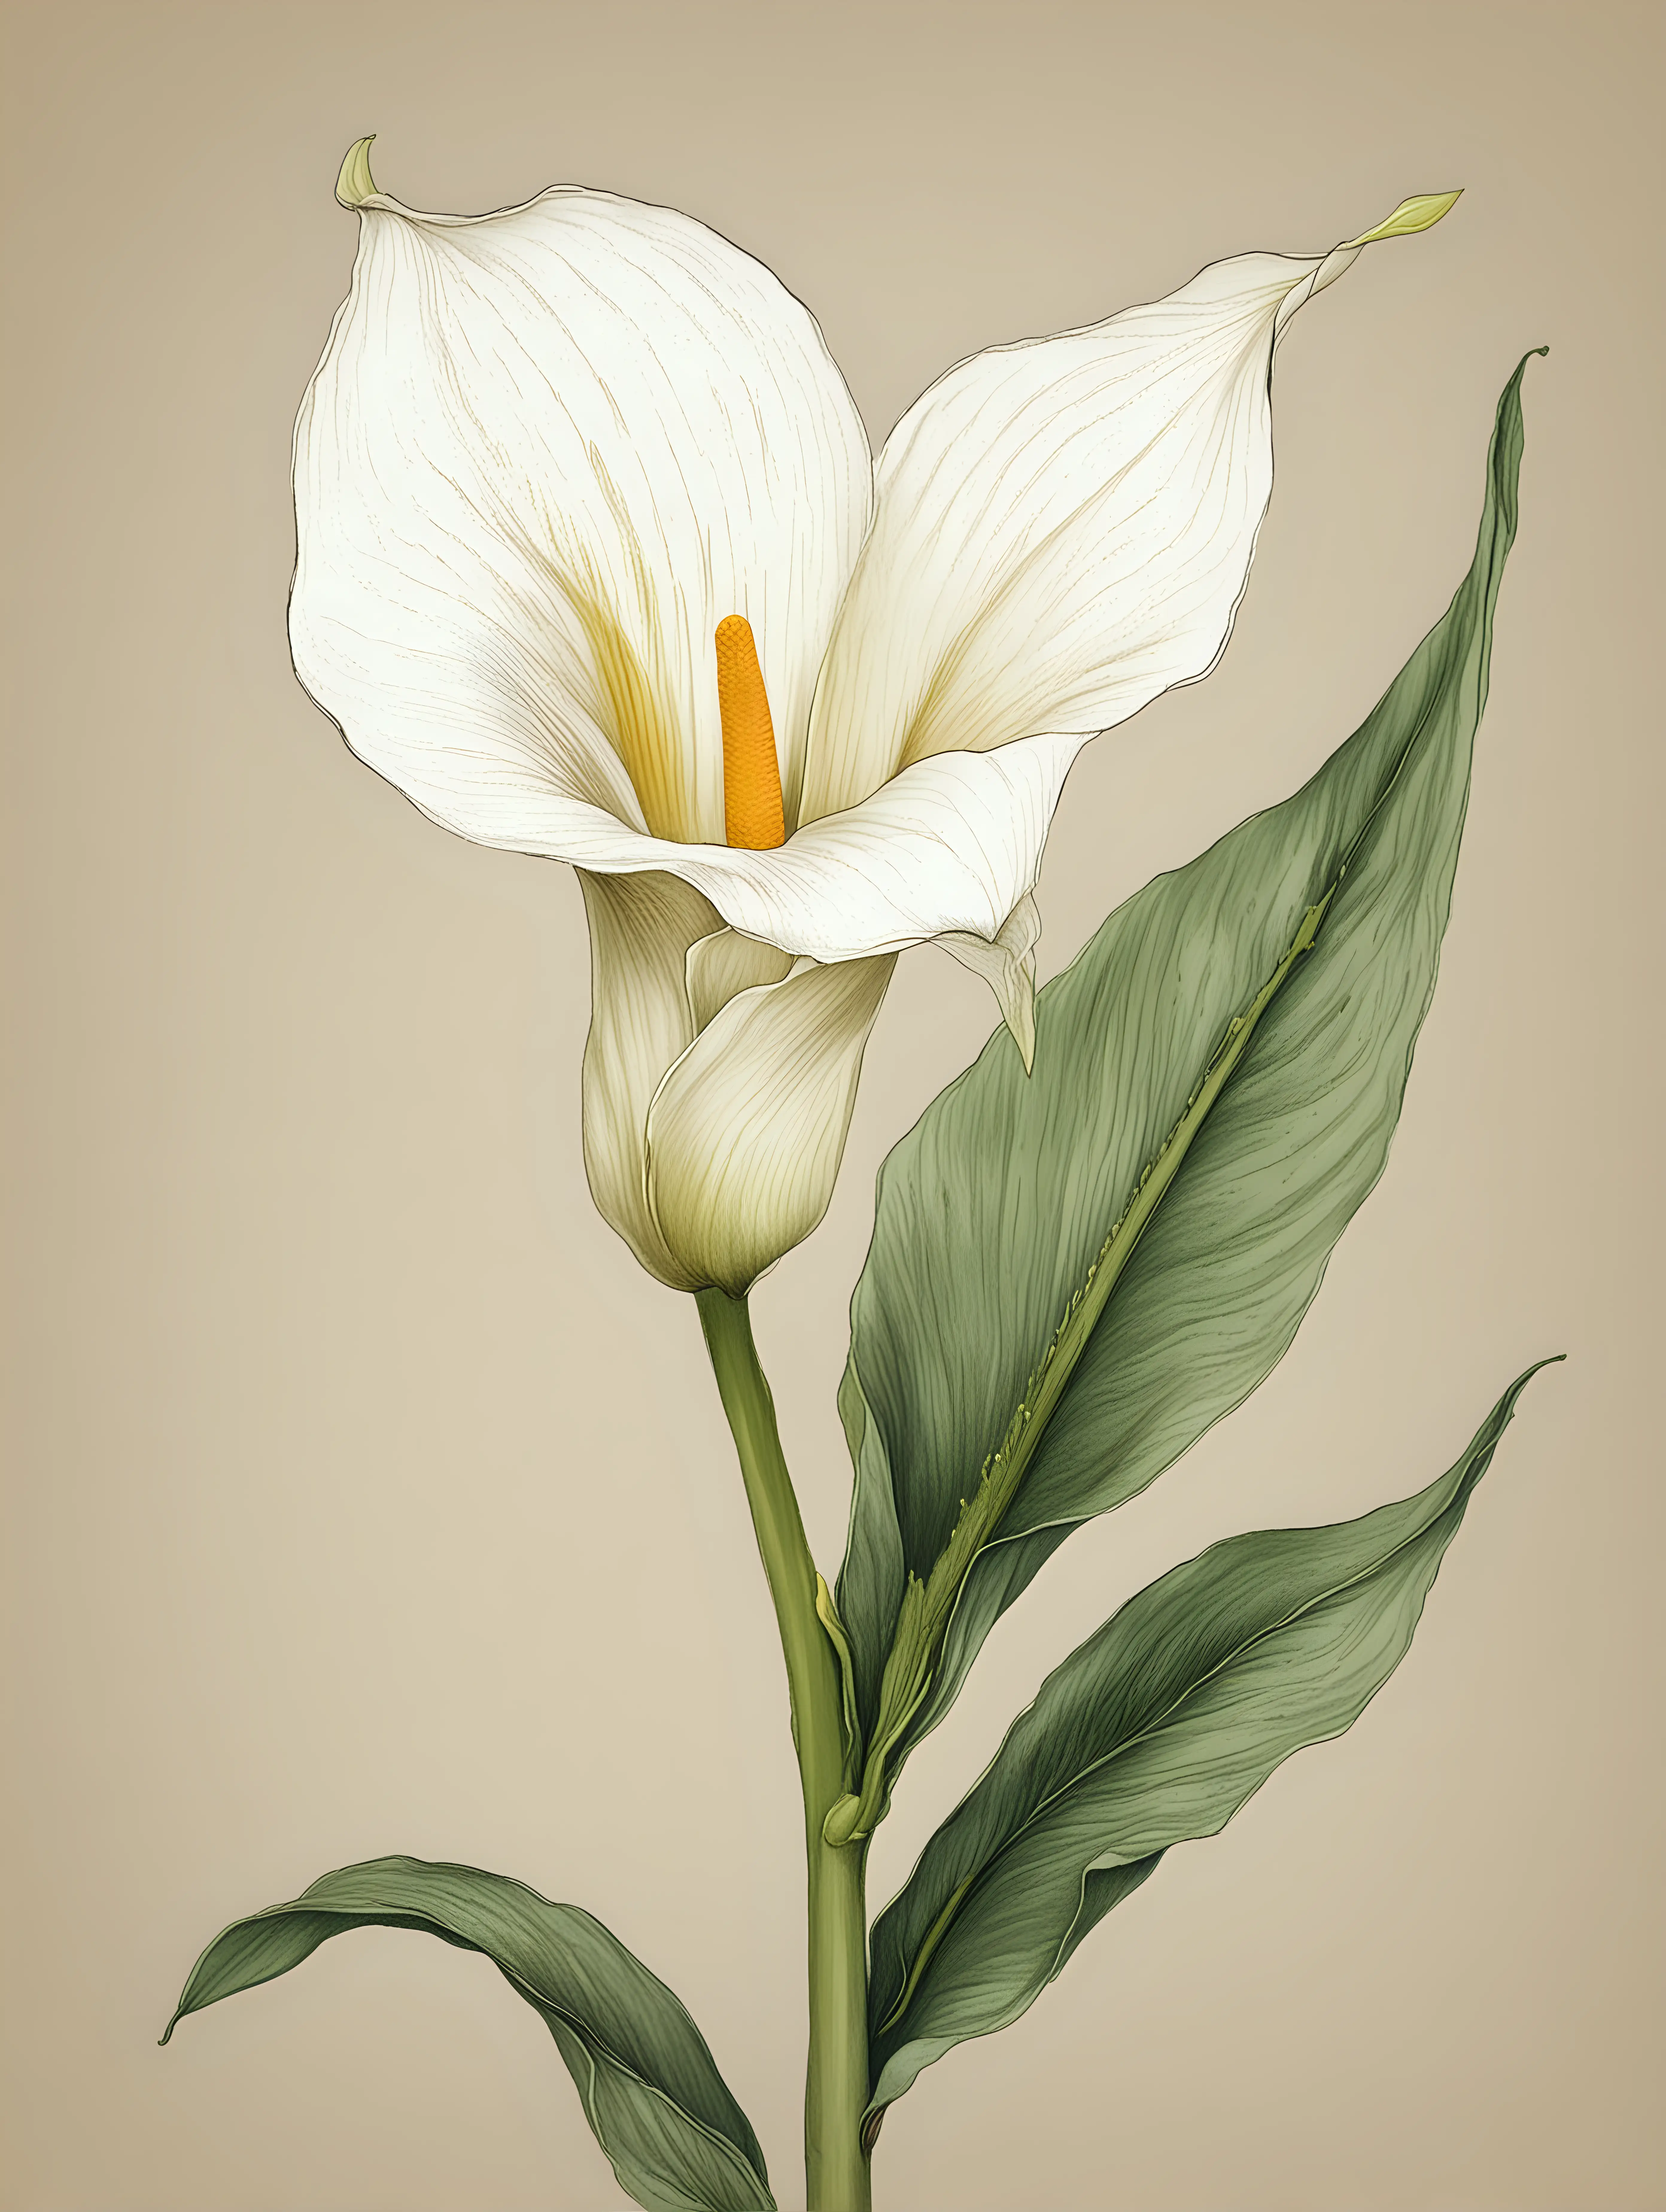 simple color line drawing of 1 calla lily flower in the style of Audubon